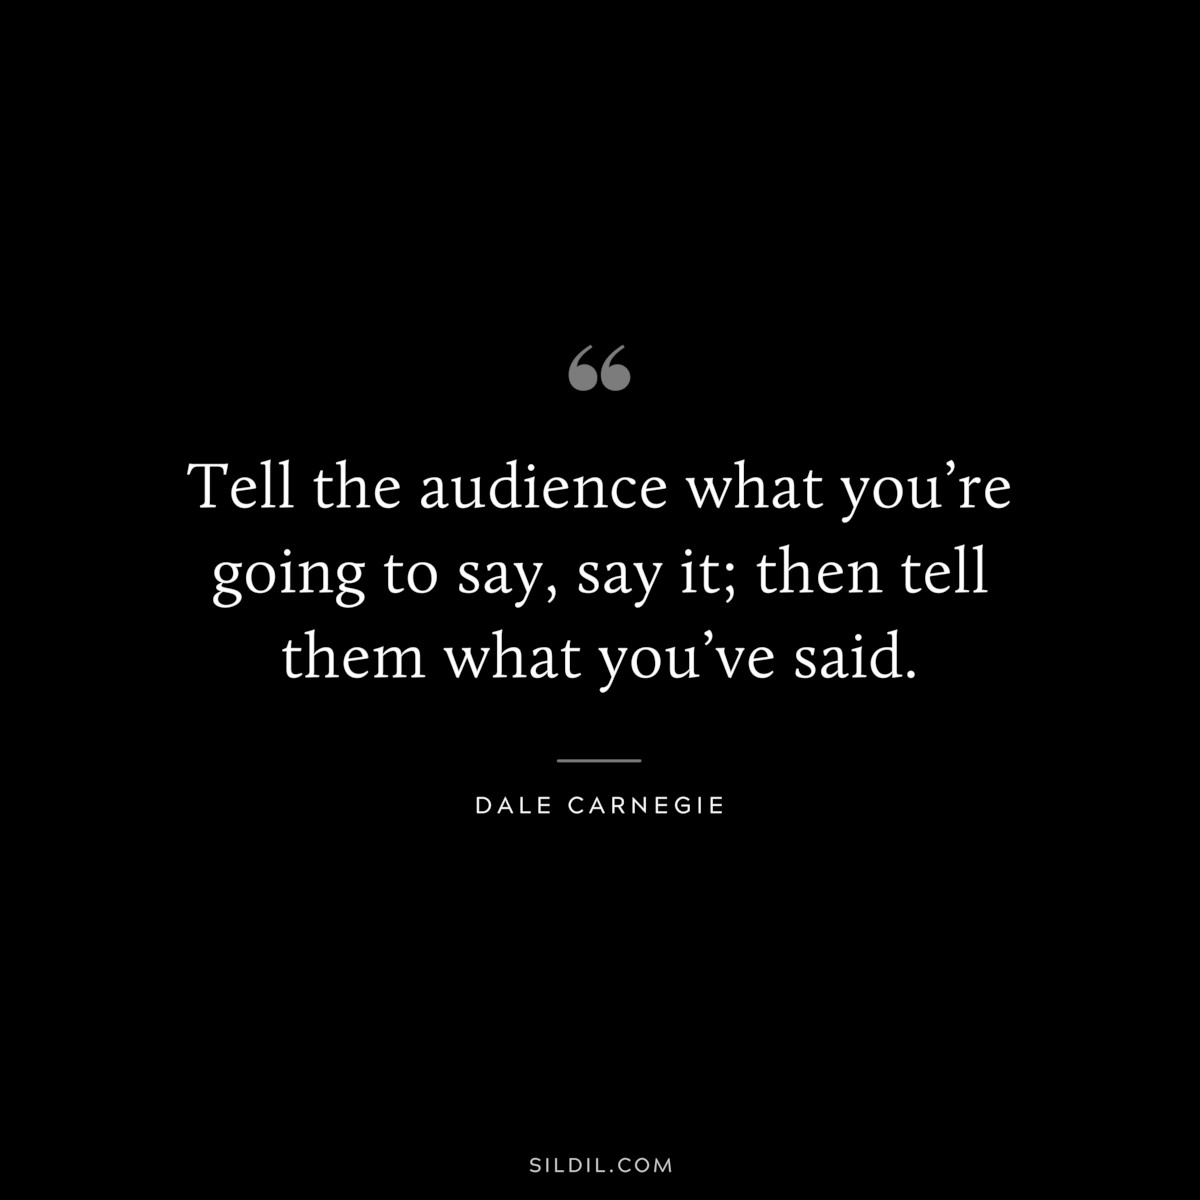 Tell the audience what you’re going to say, say it; then tell them what you’ve said.― Dale Carnegie